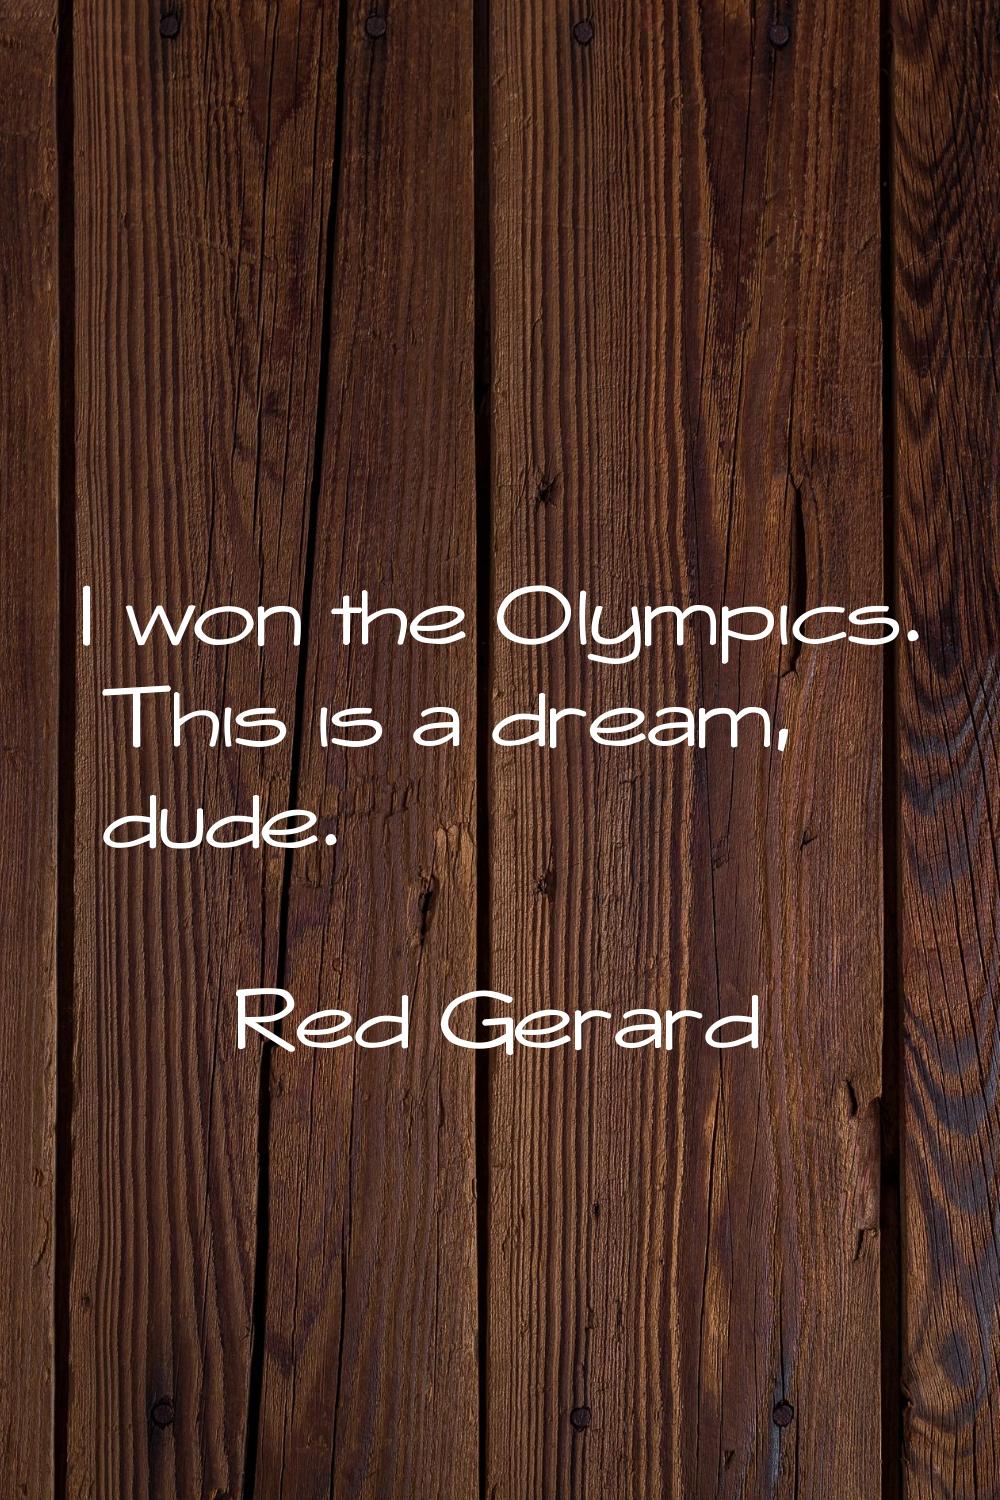 I won the Olympics. This is a dream, dude.